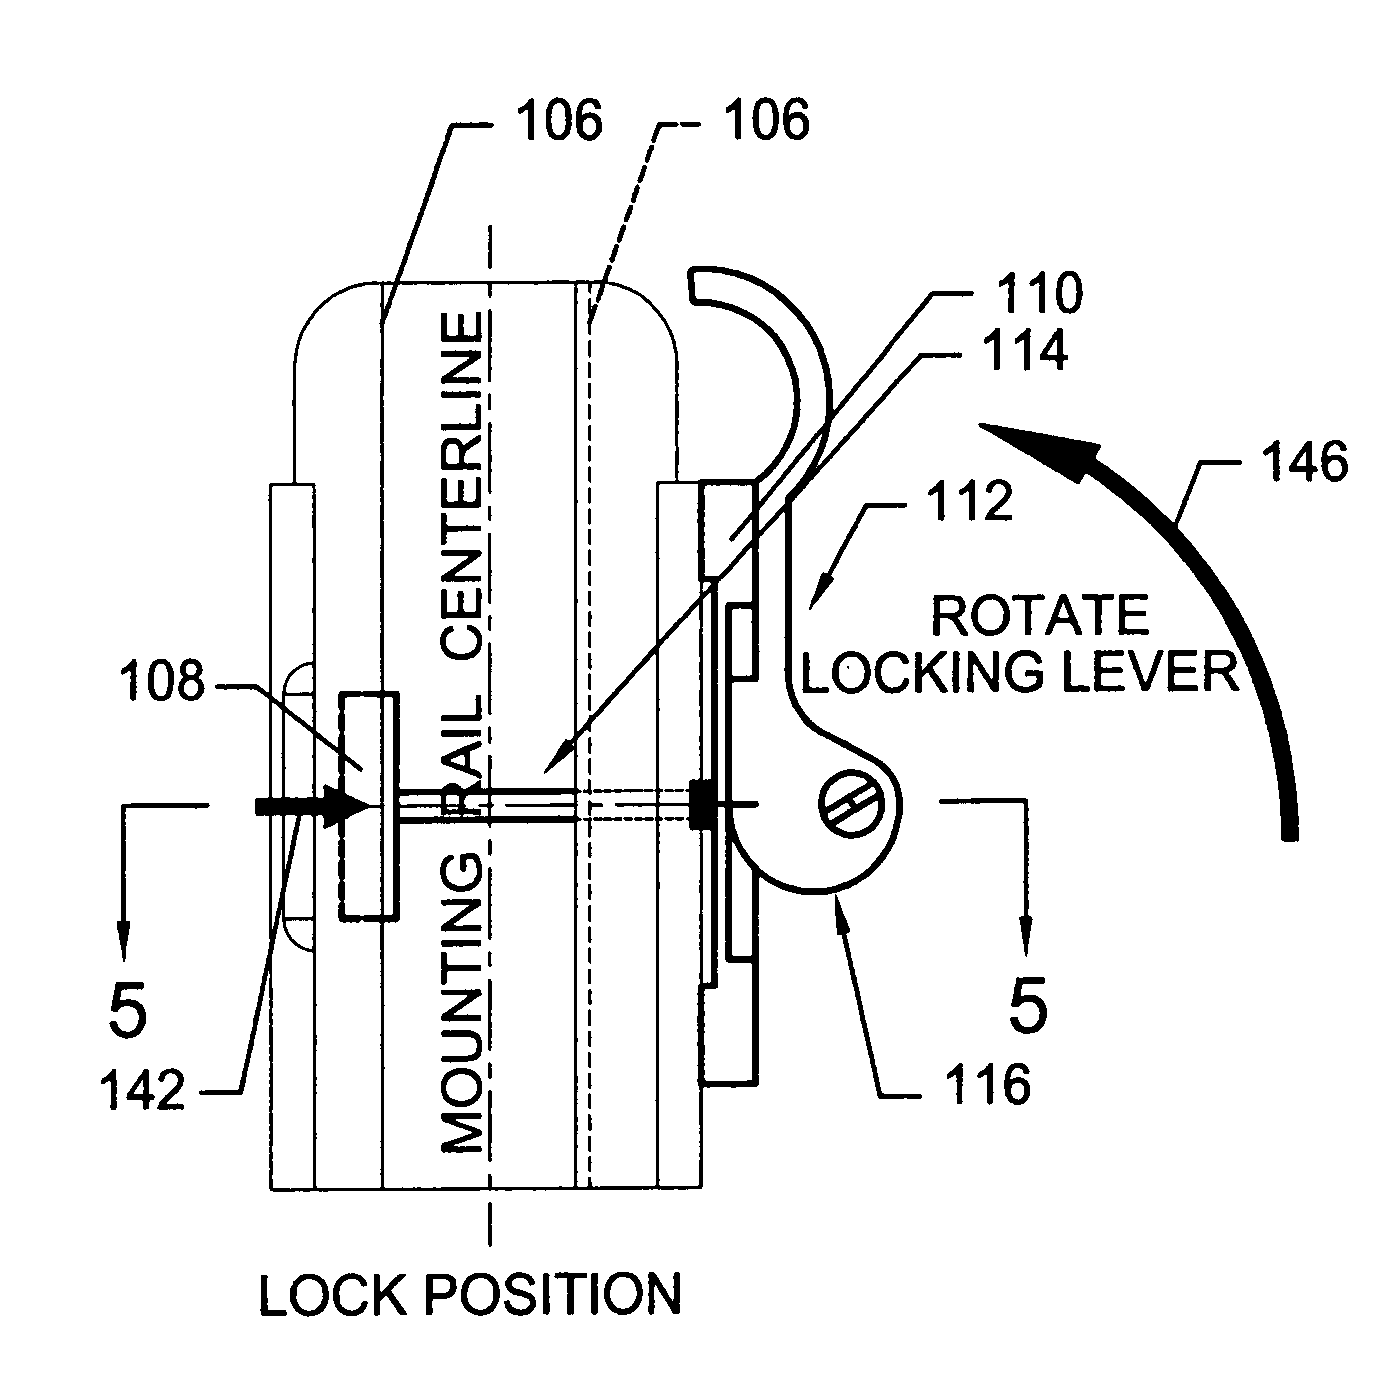 Apparatus and method for coupling an auxiliary device with a male dovetail rail